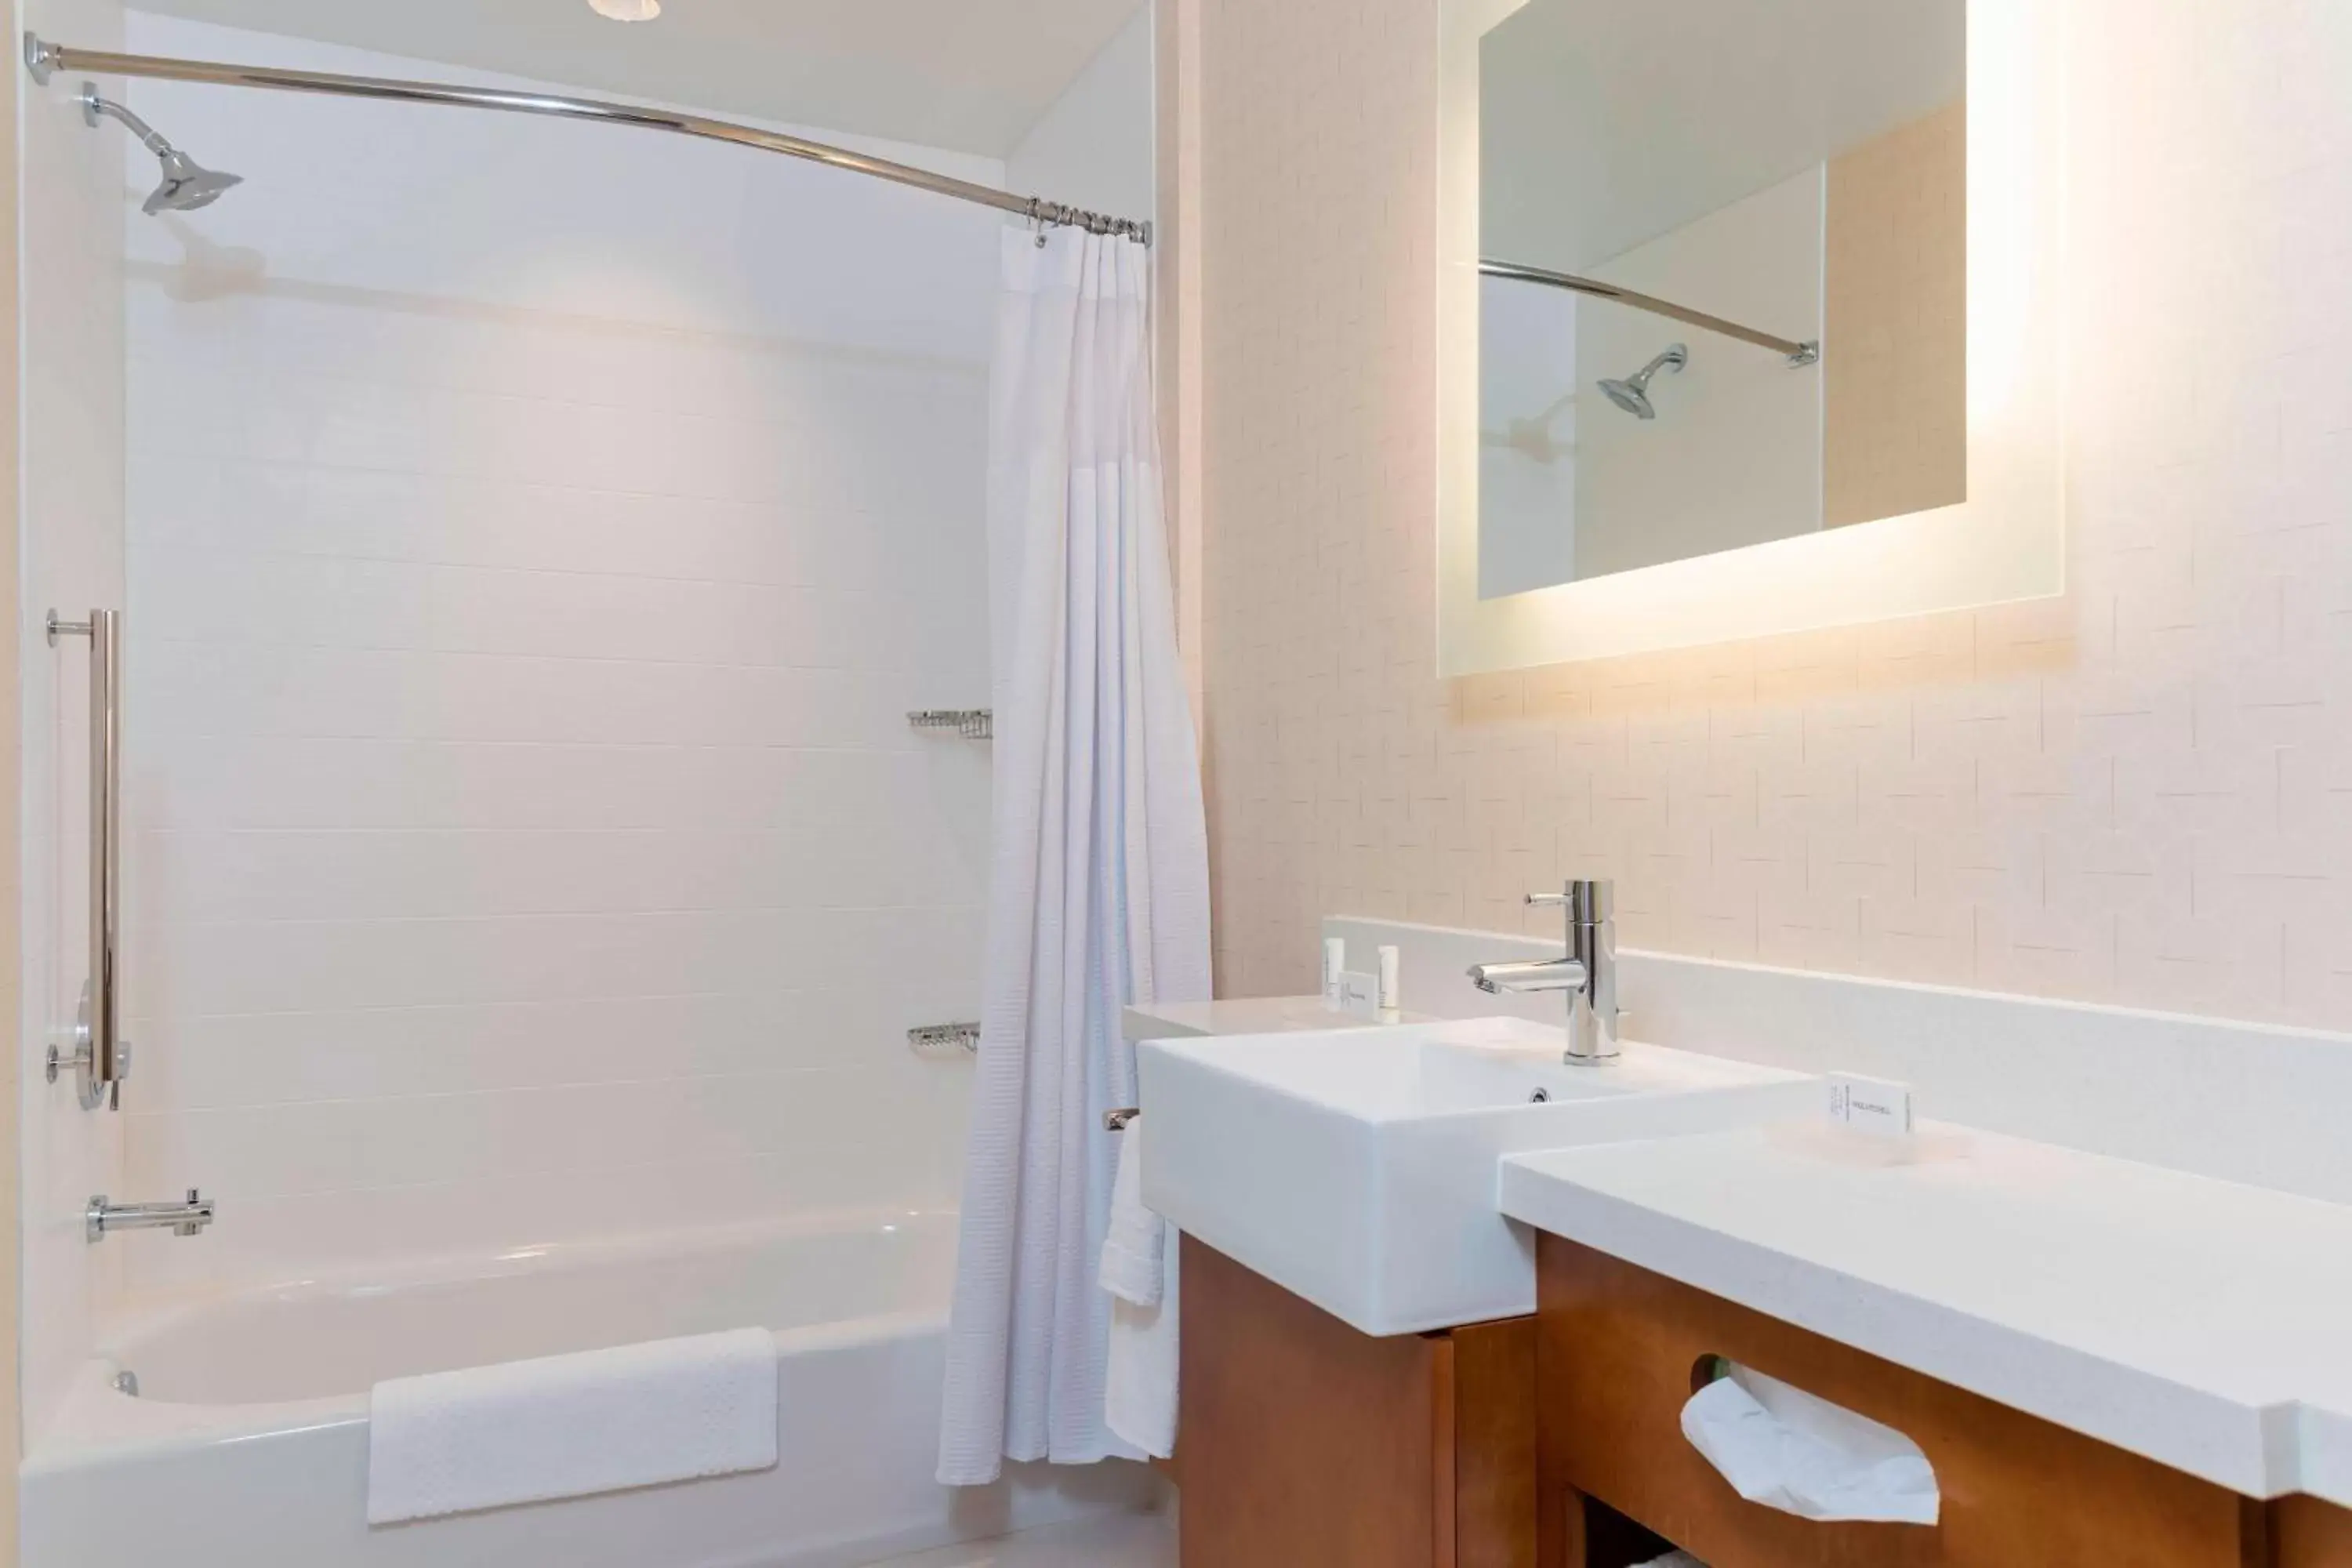 Bathroom in SpringHill Suites by Marriott Chicago Southeast/Munster, IN